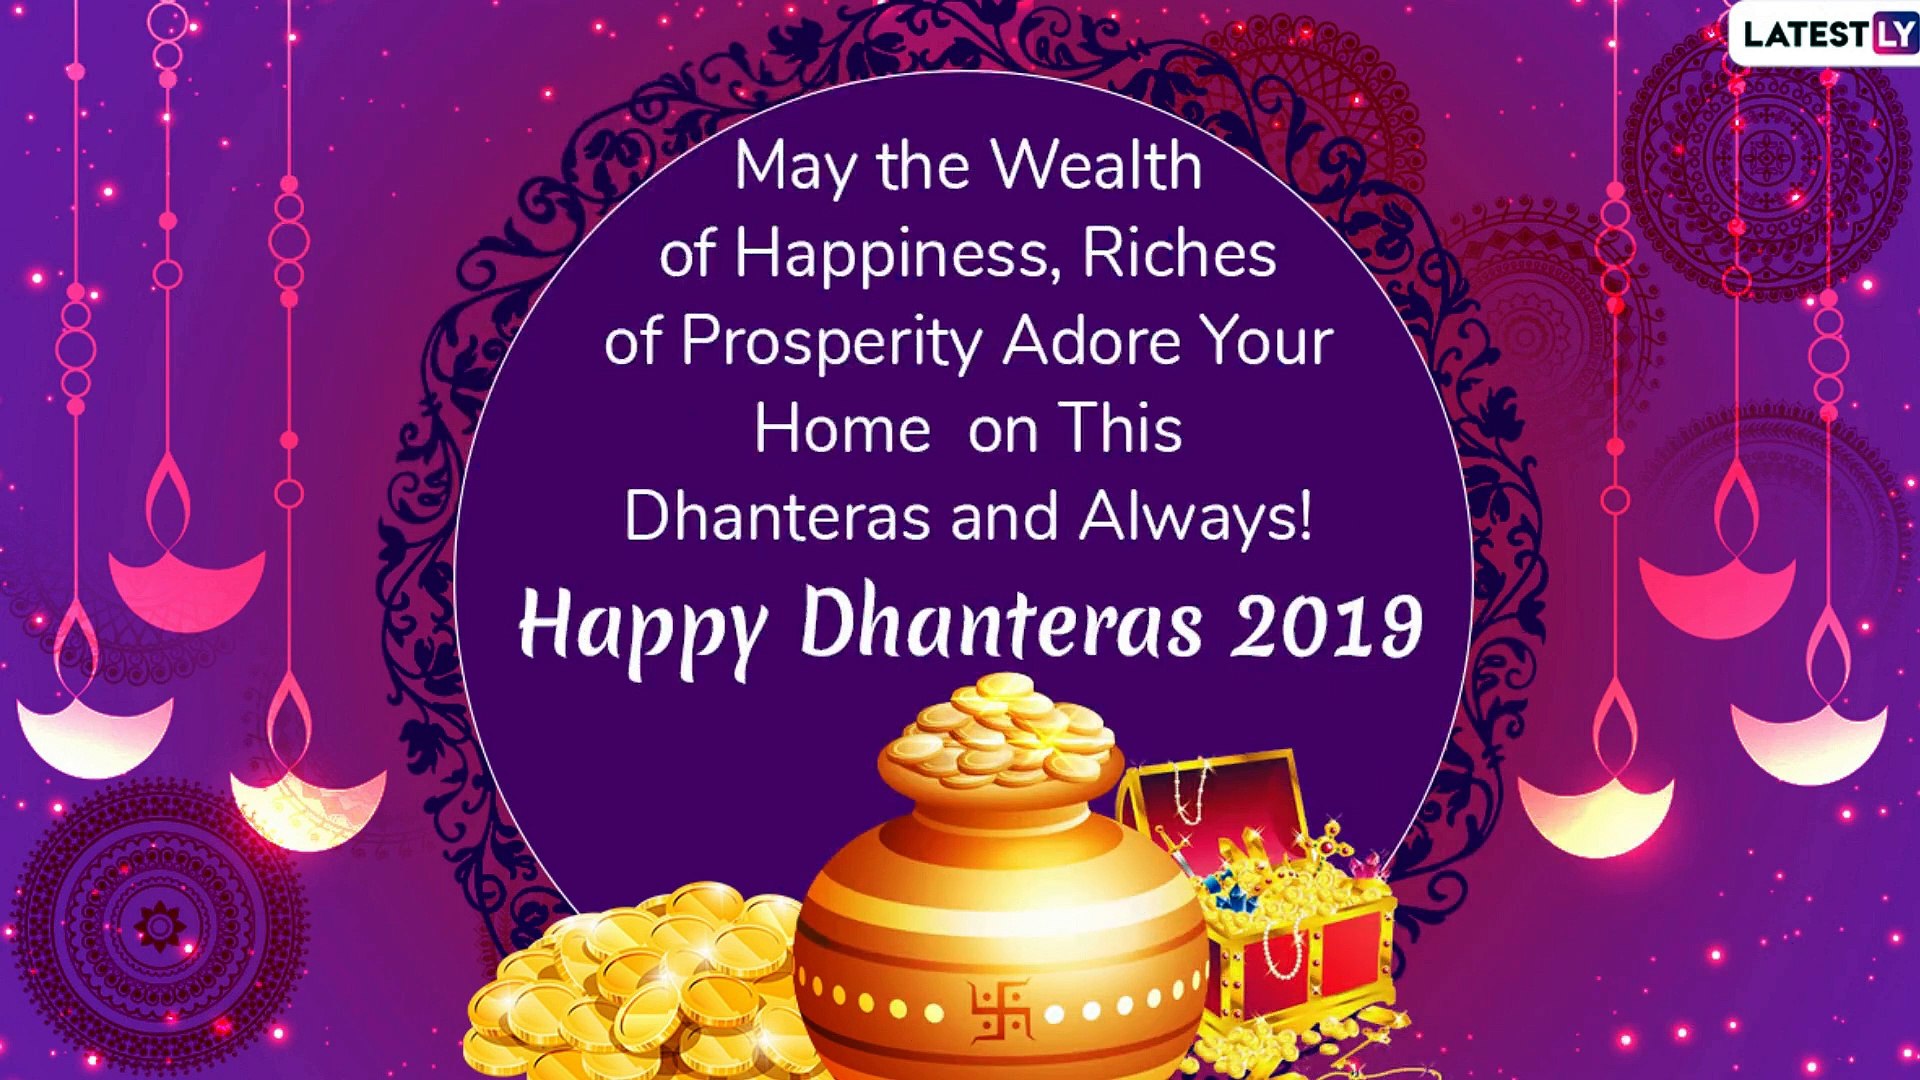 Happy Dhanteras 2019 Images & Diwali Wishes in Advance: WhatsApp Messages,  SMS, Quotes & Greetings - video Dailymotion